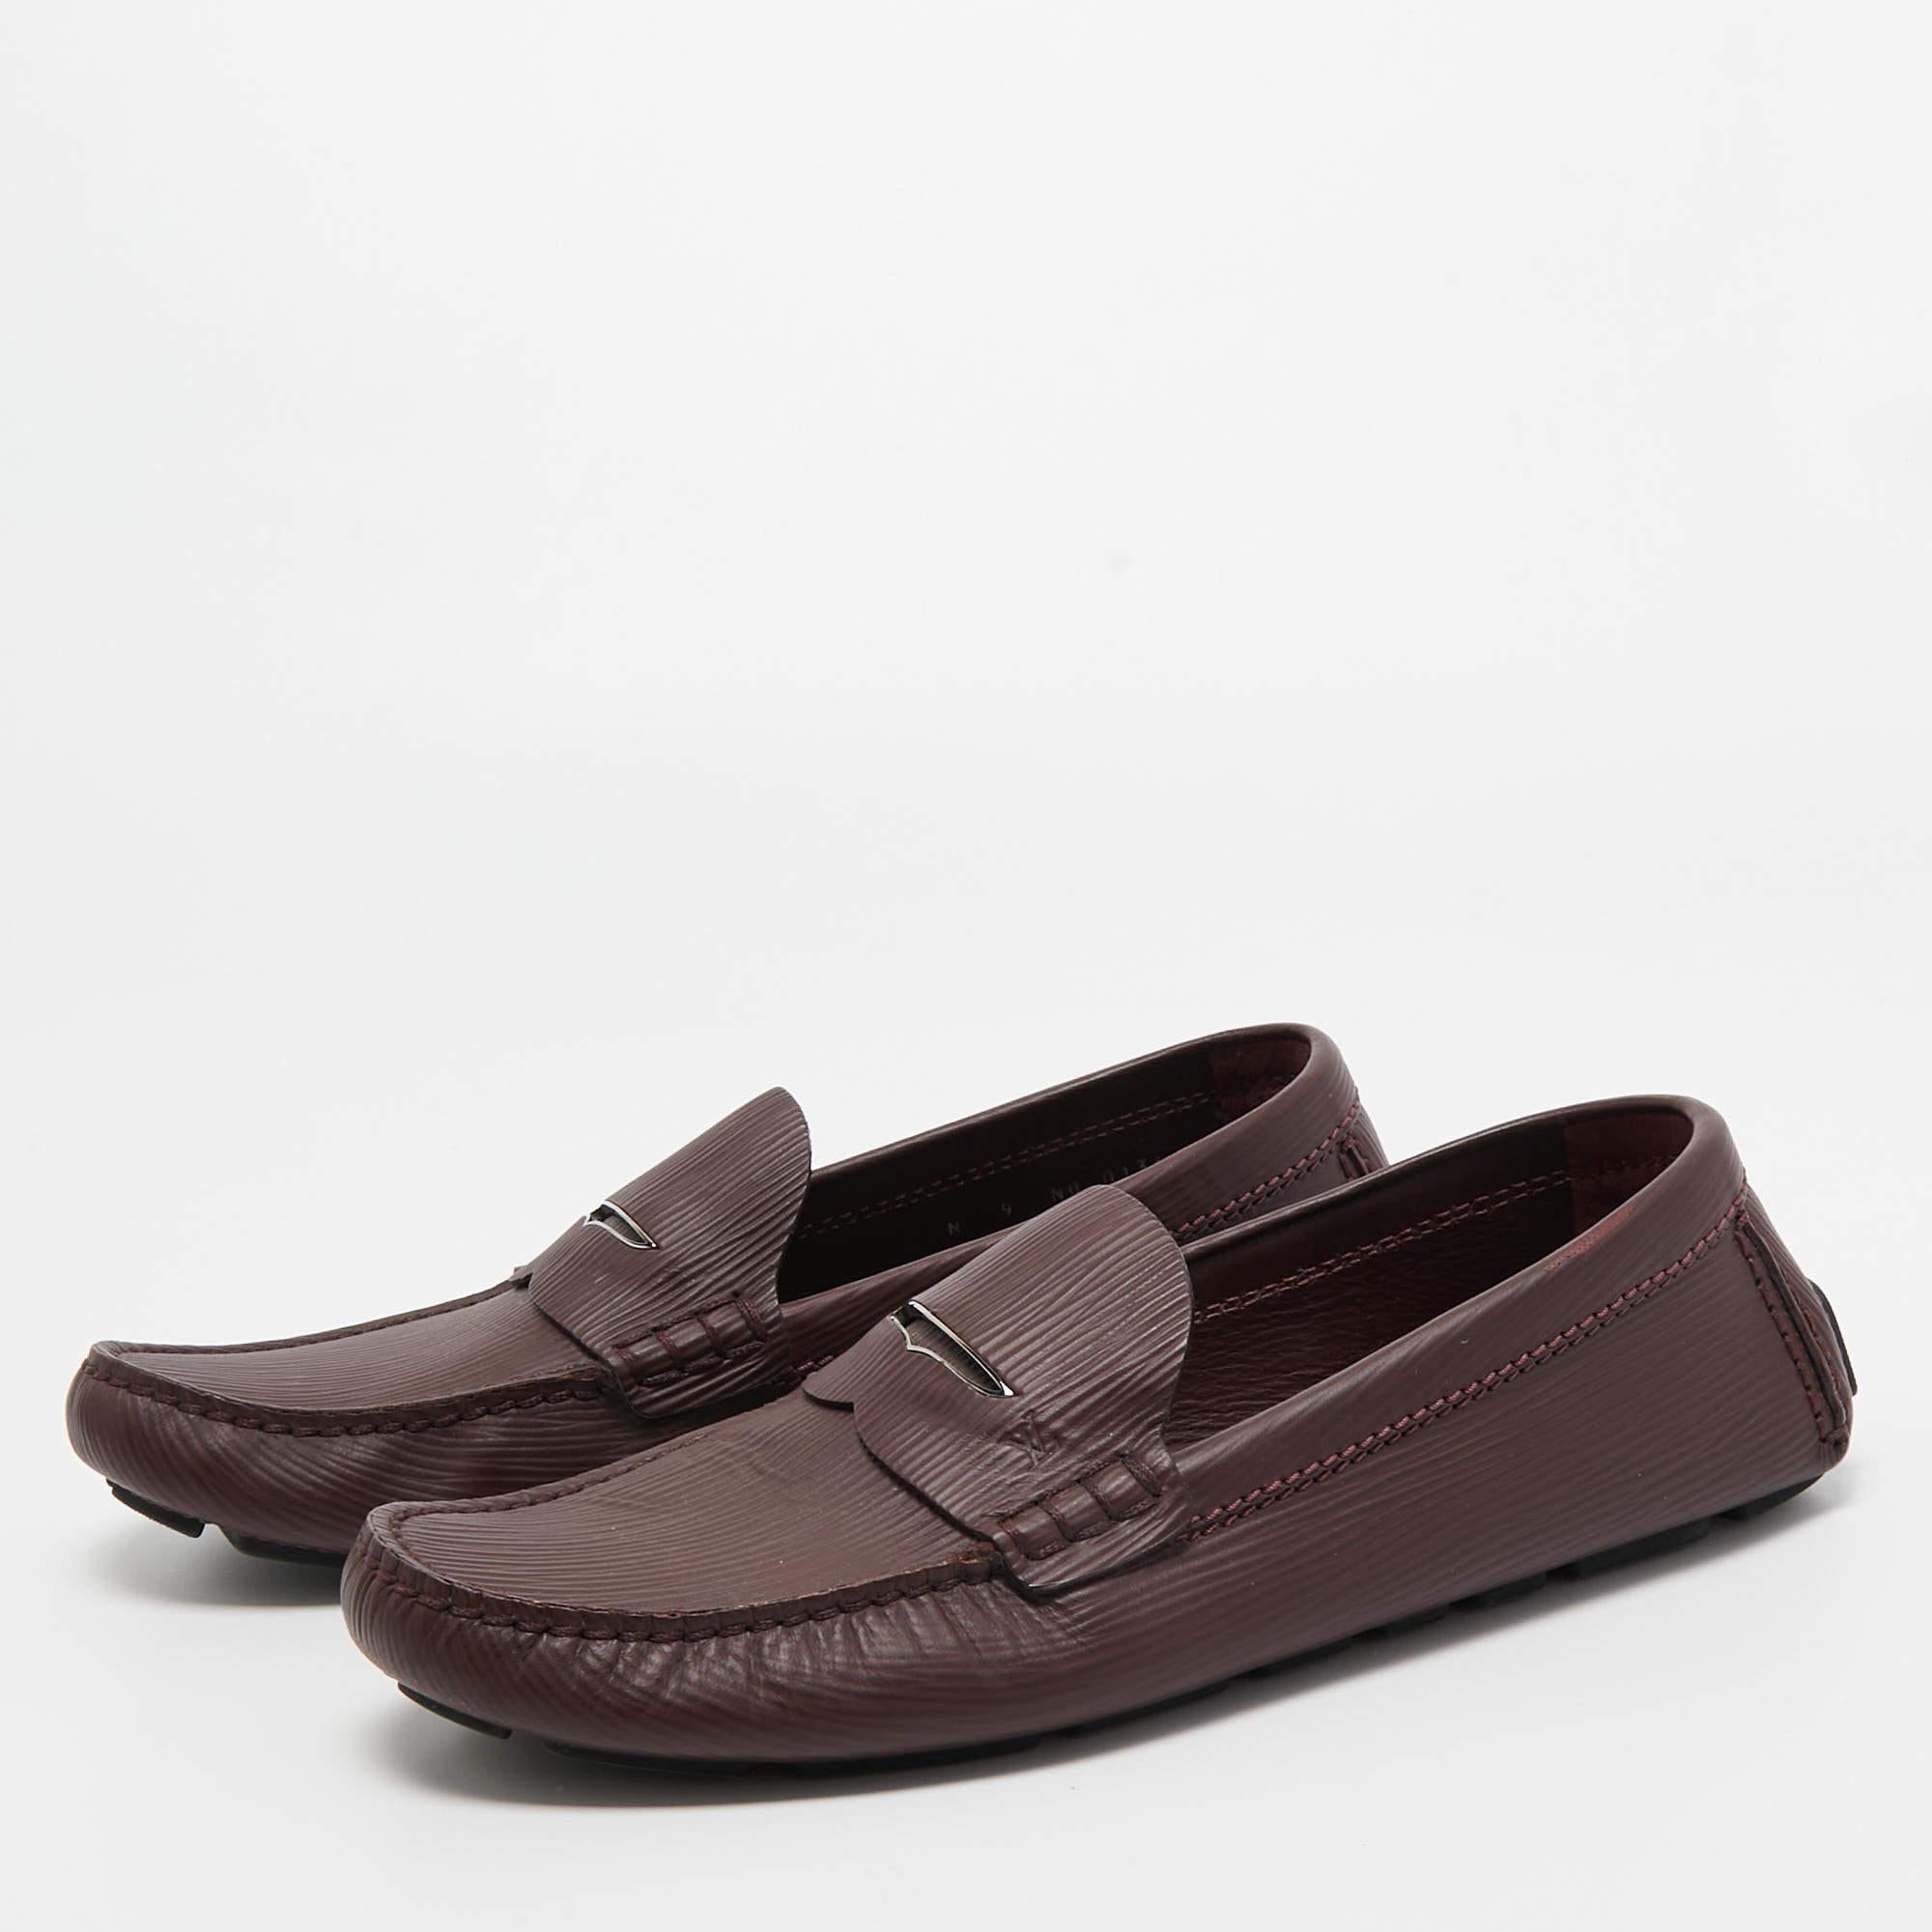 Stylish and super comfortable, this pair of loafers by Louis Vuitton will make a great addition to your shoe collection. They've been crafted from Epi Leather and styled with Penny keeper straps. Leather insoles and durable outsoles finely complete